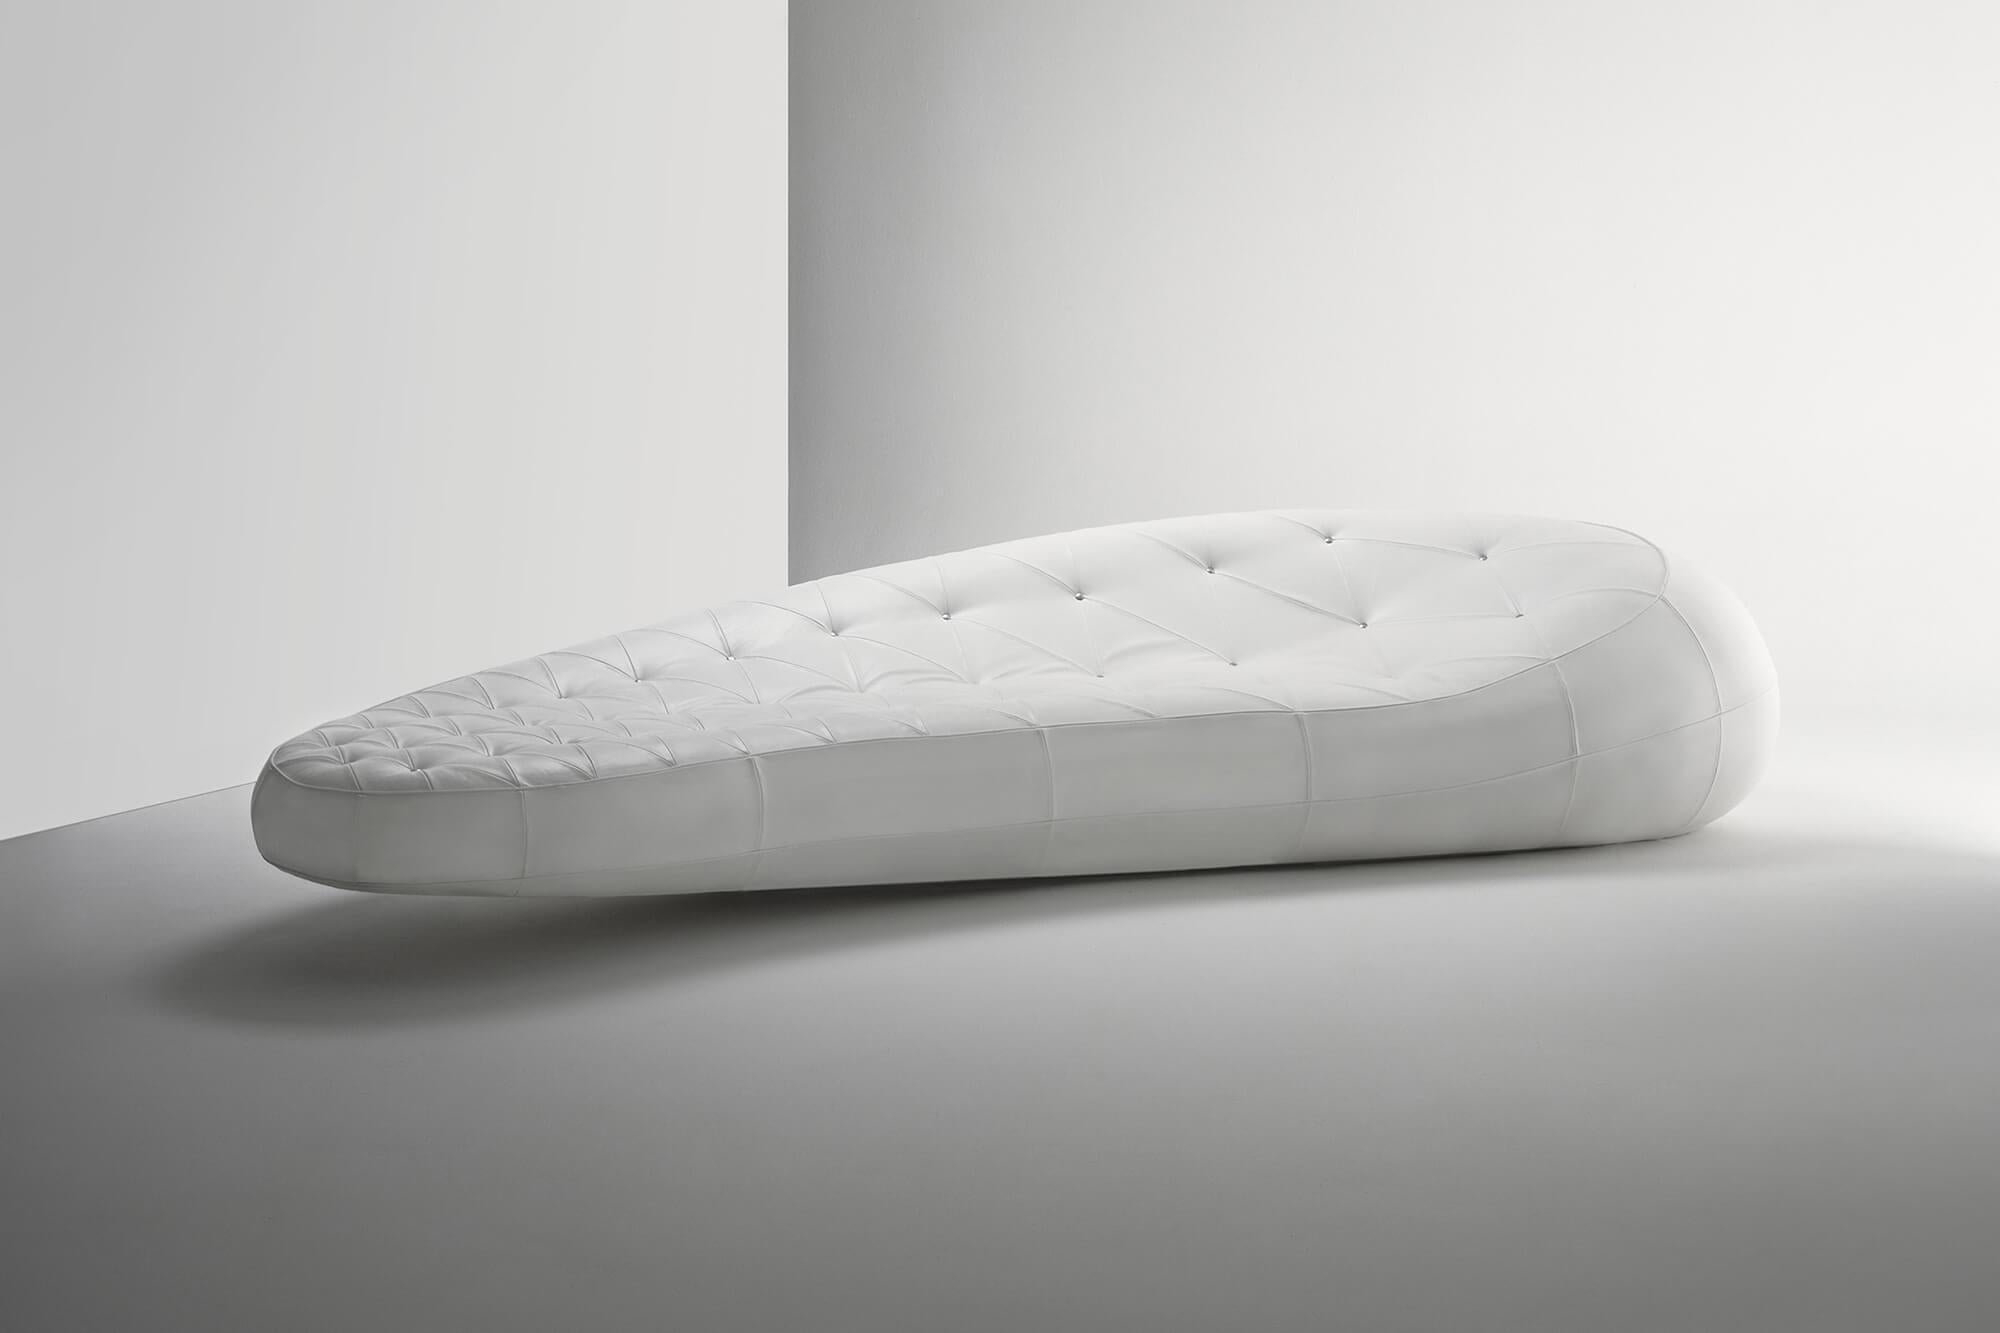 Celebrated architect Amanda Levete took inspiration from the traditional Chesterfield sofa for this futuristic design. Sophisticated architectural drawing technology created the soft, modern contours and organic form of the Chester Limited Edition.